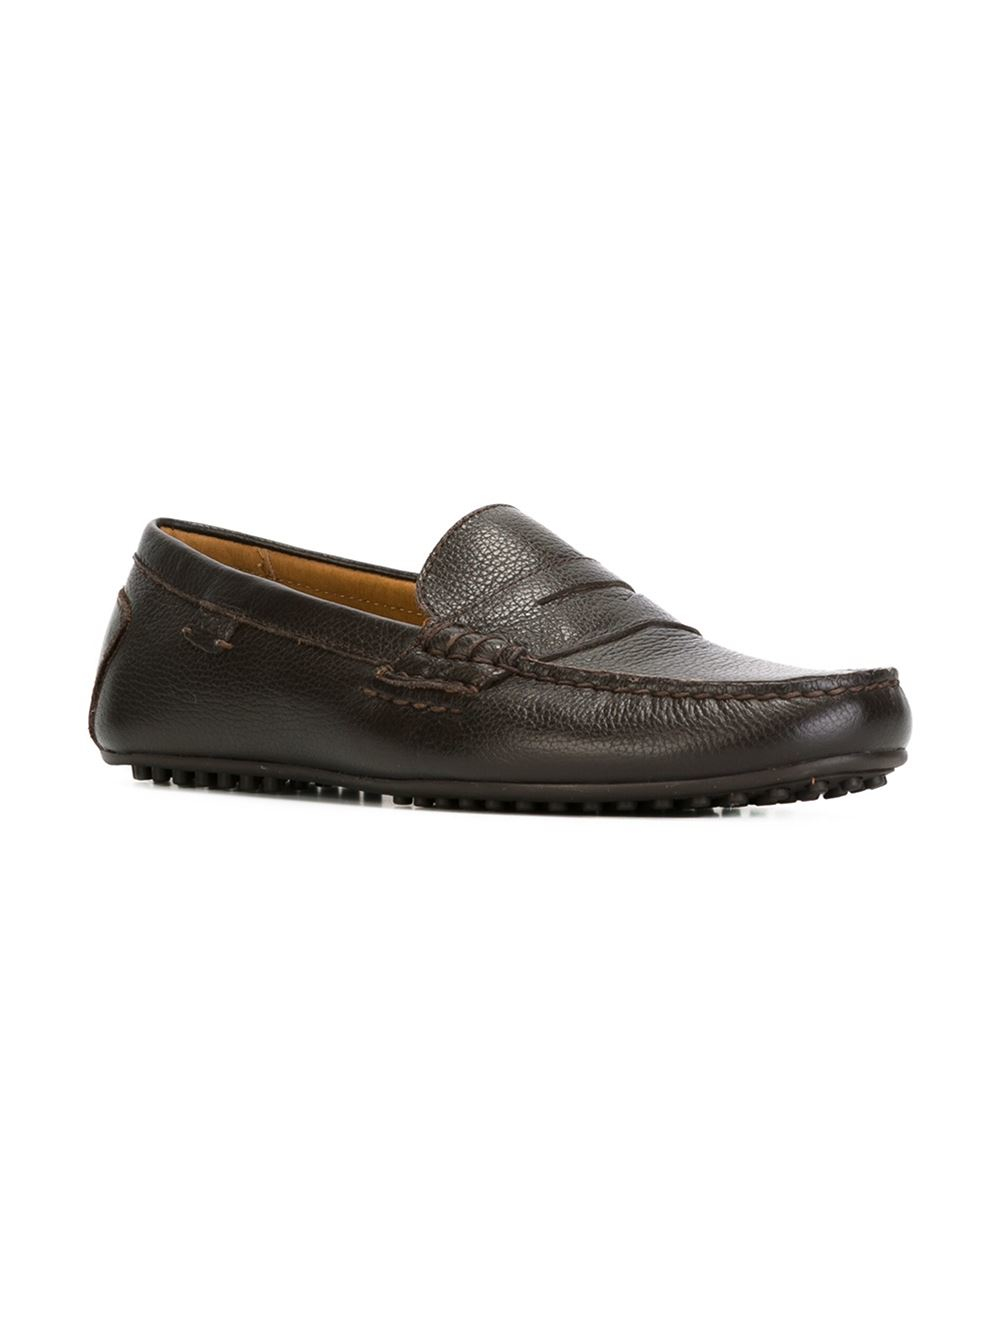 Polo ralph lauren Classic Driving Shoes in Brown for Men | Lyst